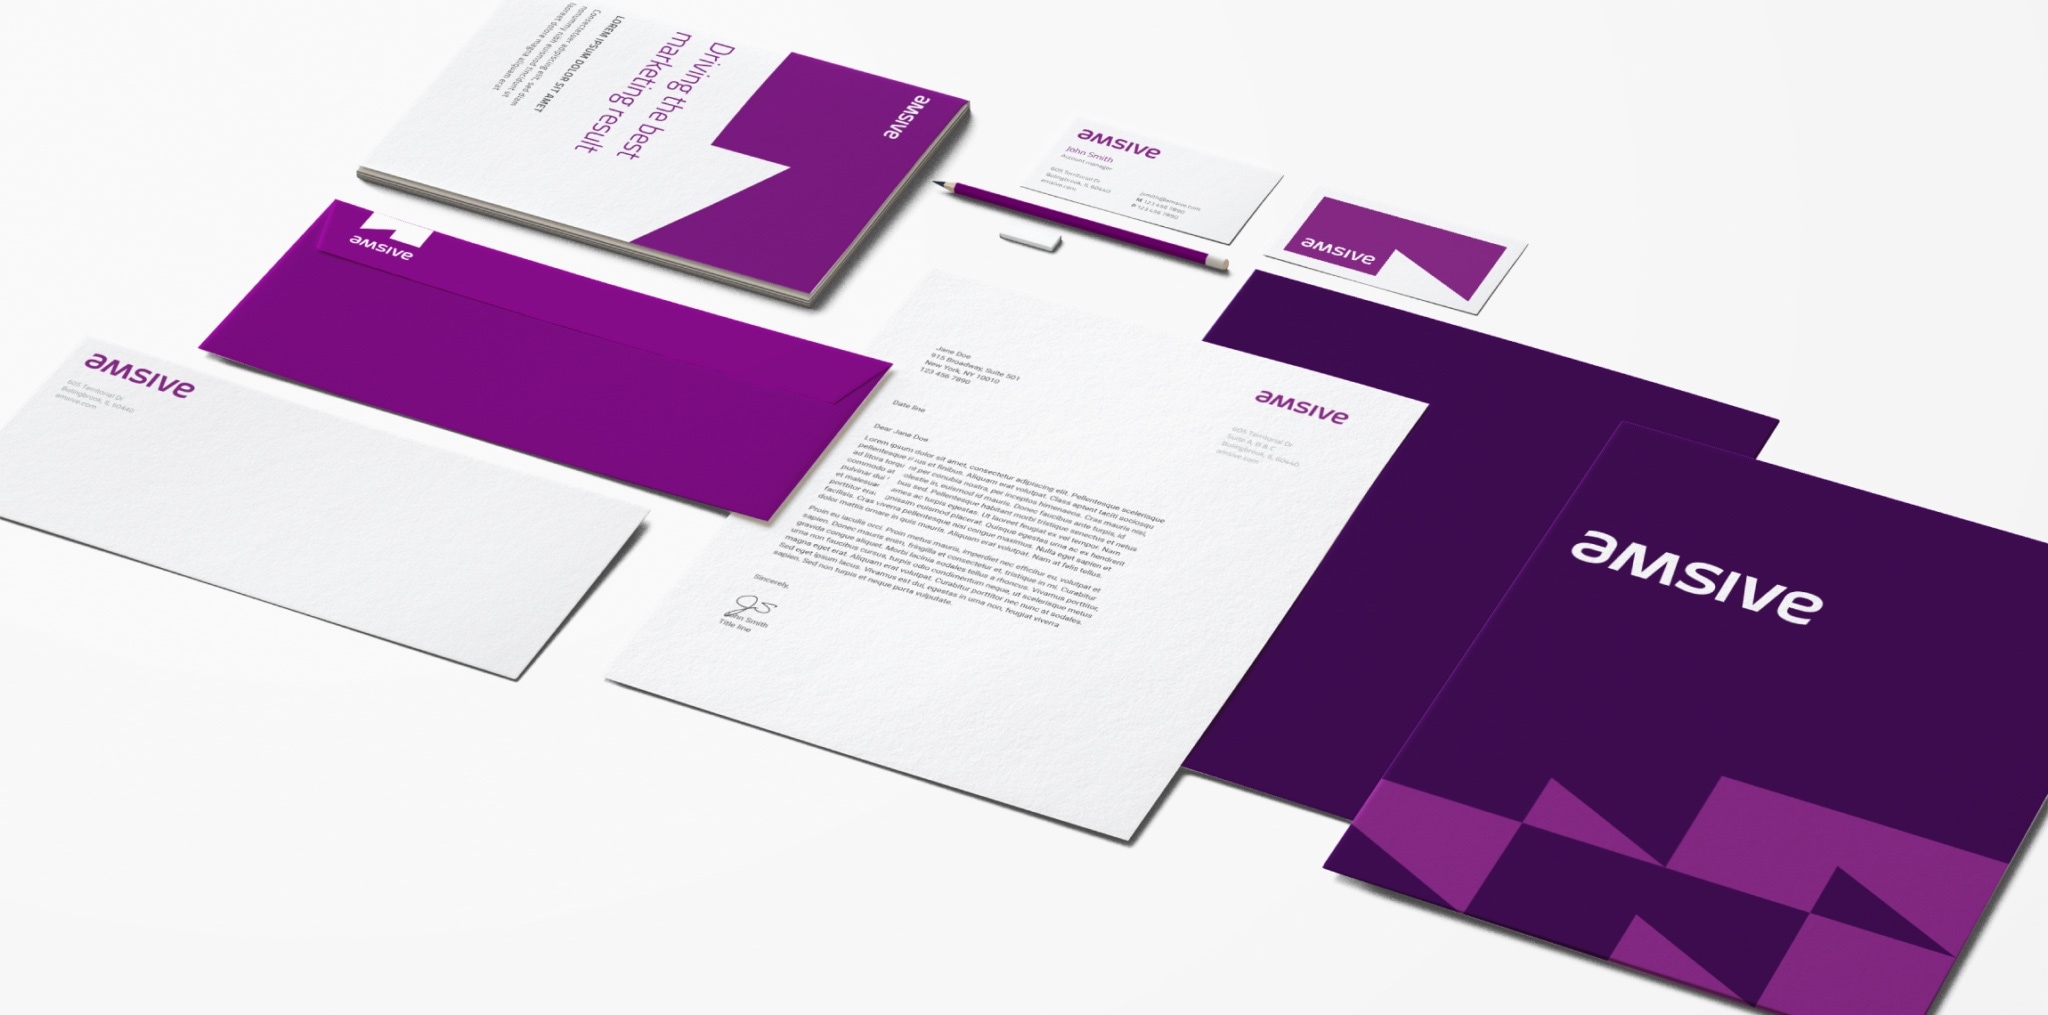 Examples of the design system applied to printed materials: a purple and white business card and envelope, folder and brochure